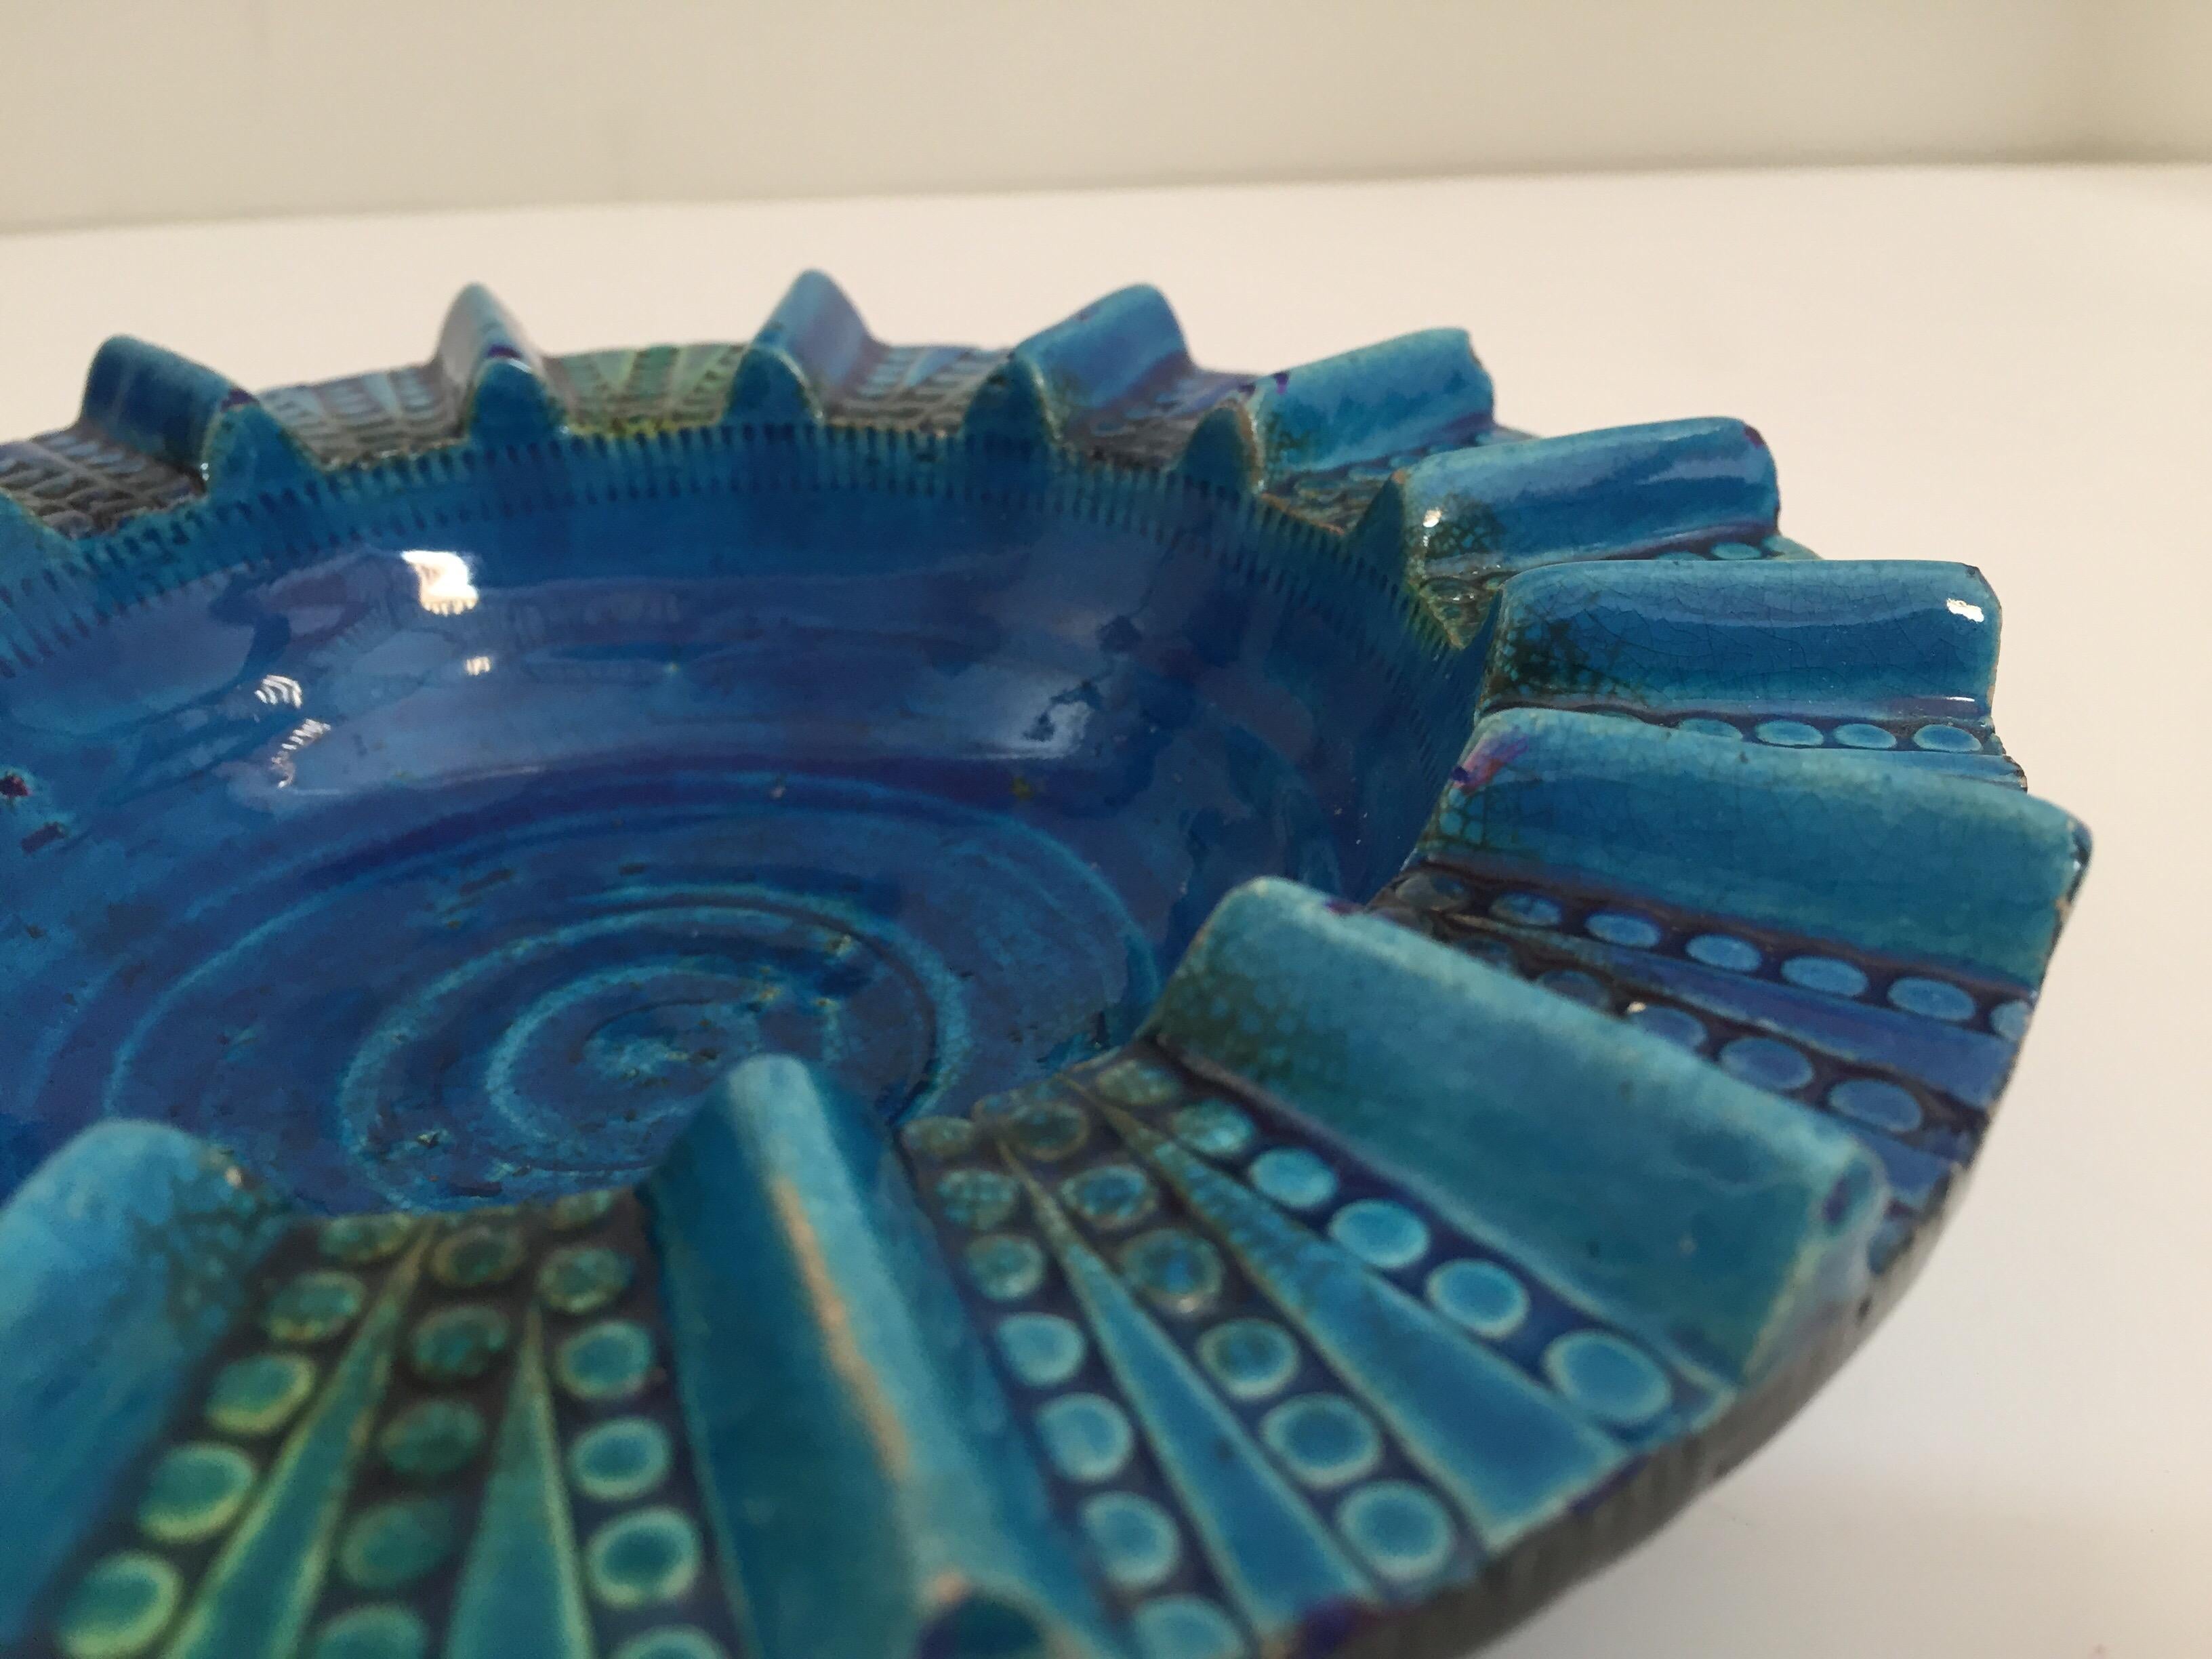 Vintage Blue Ceramic Ashtray Handcrafted in Italy by Aldo Londi 1950 For Sale 7